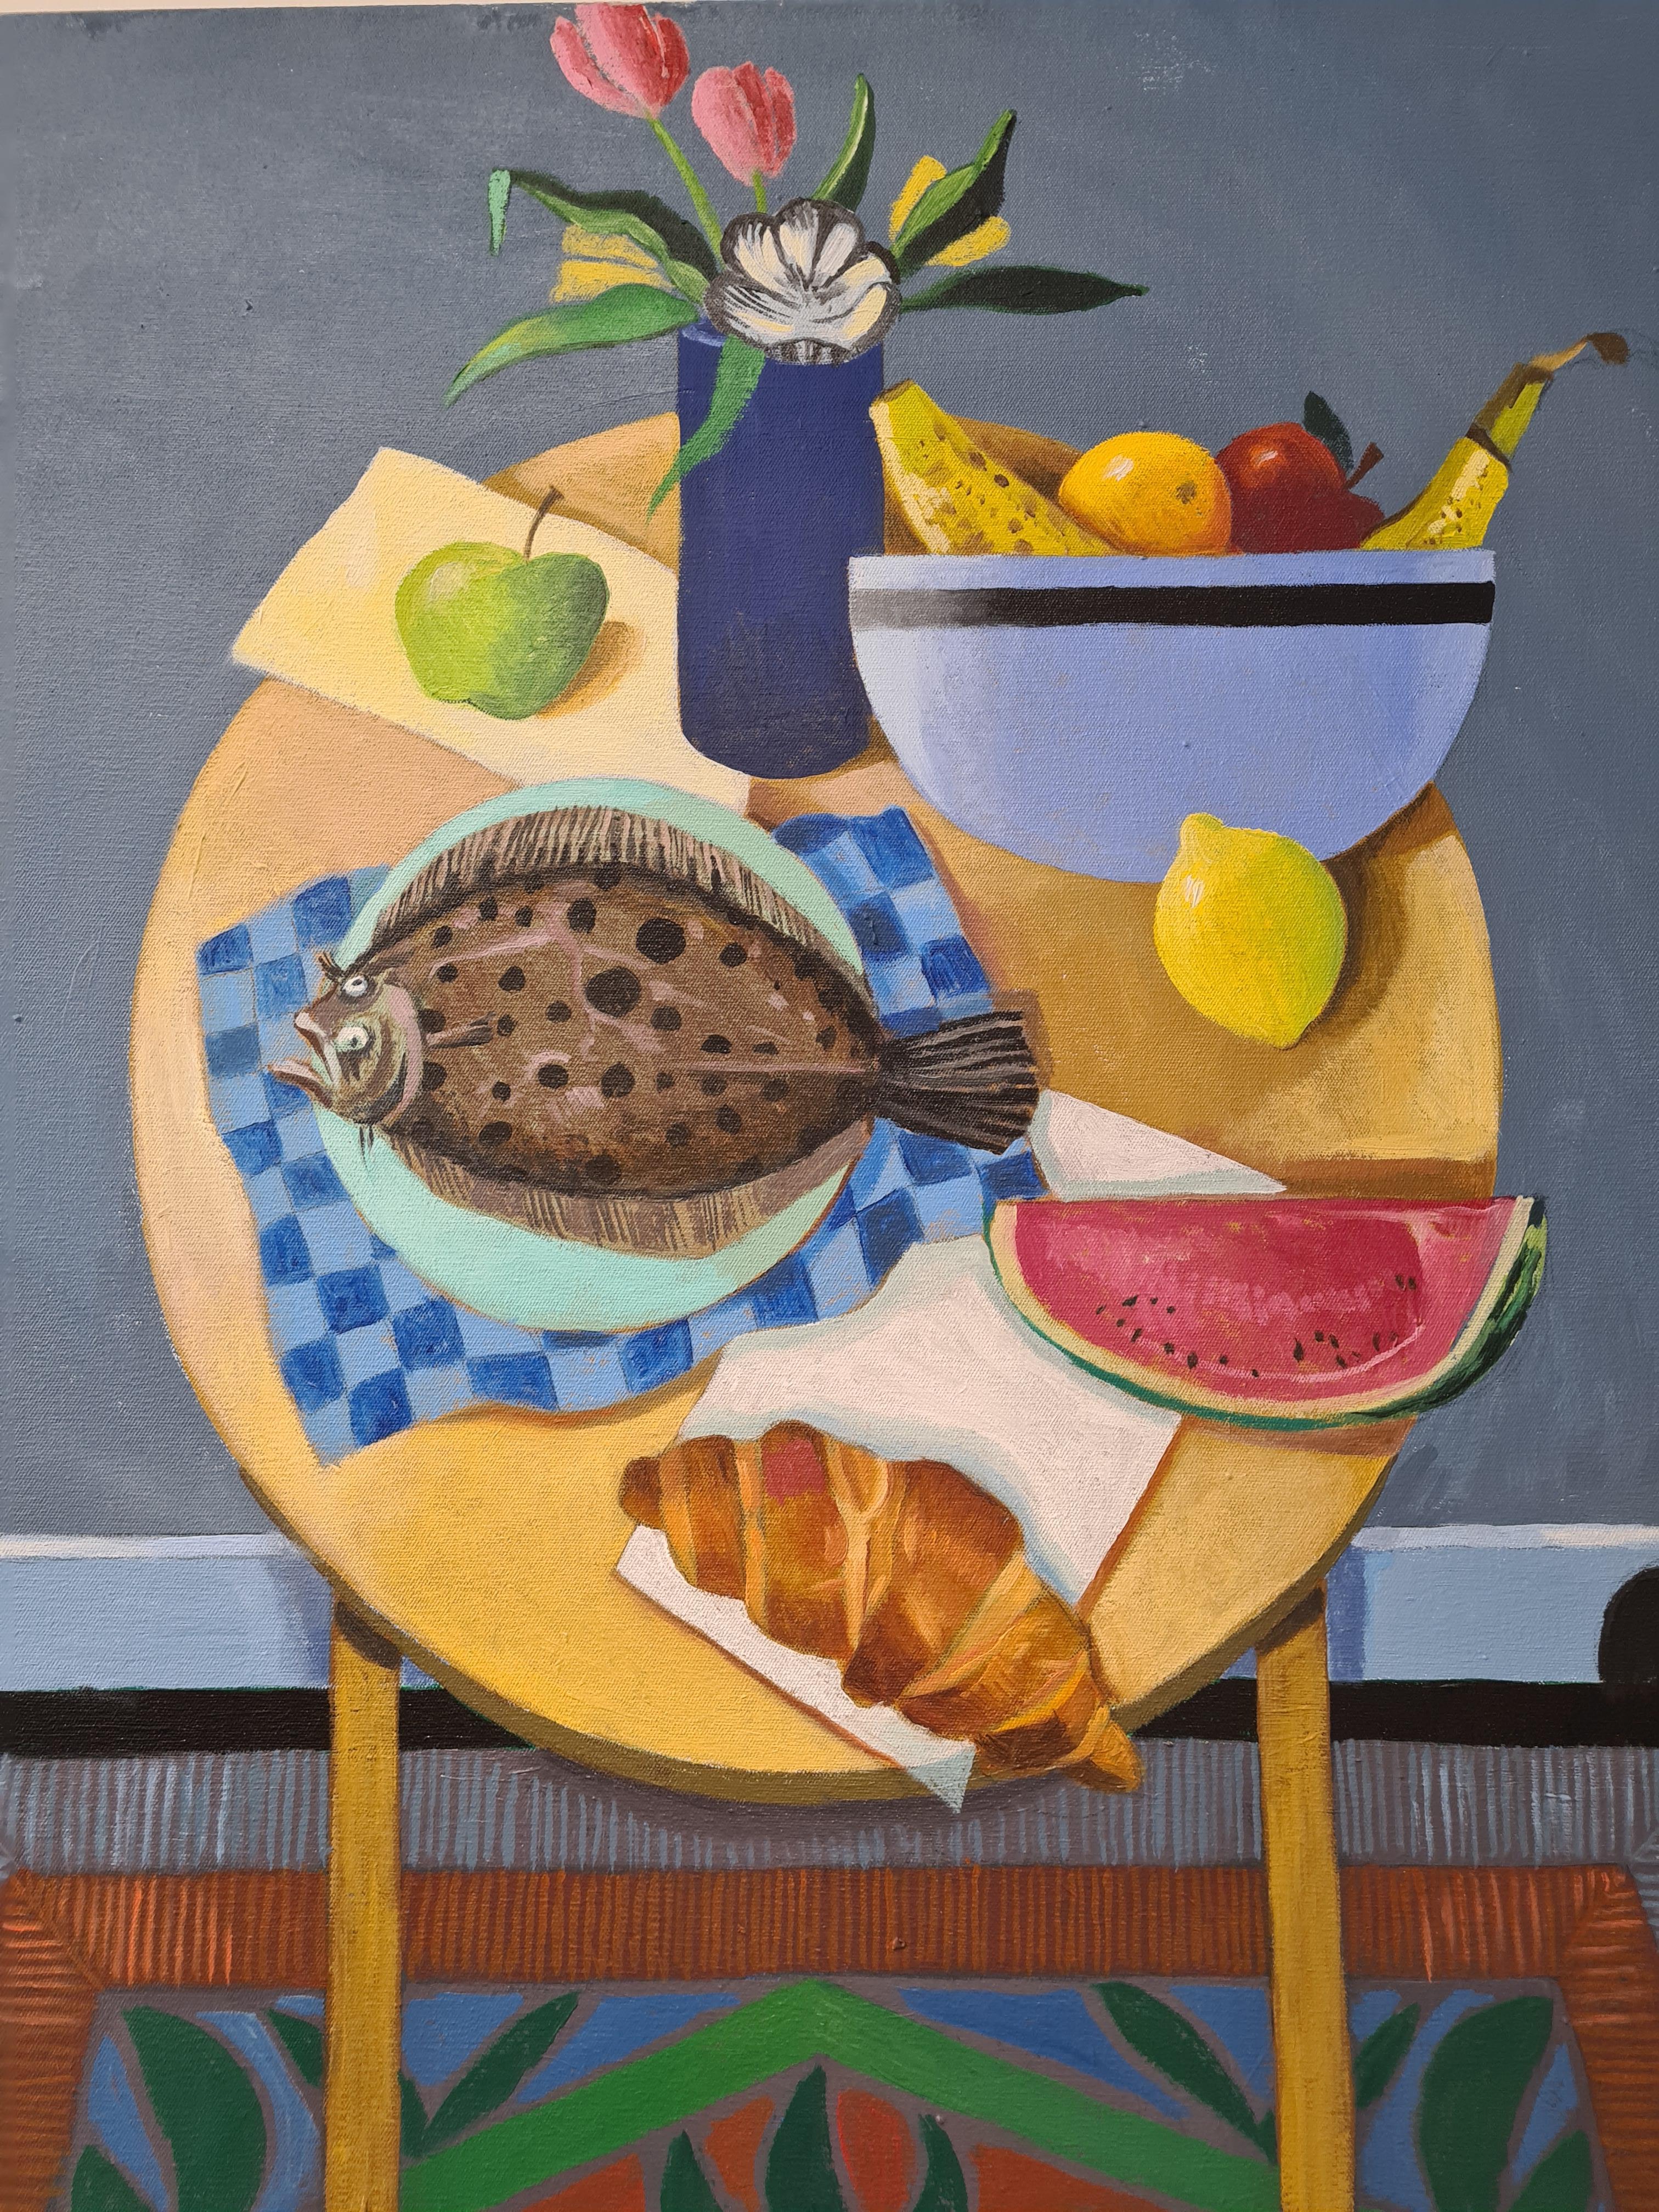 Breakfast Tablescape with Plaice. Oil on Canvas. - Painting by Frank Docherty